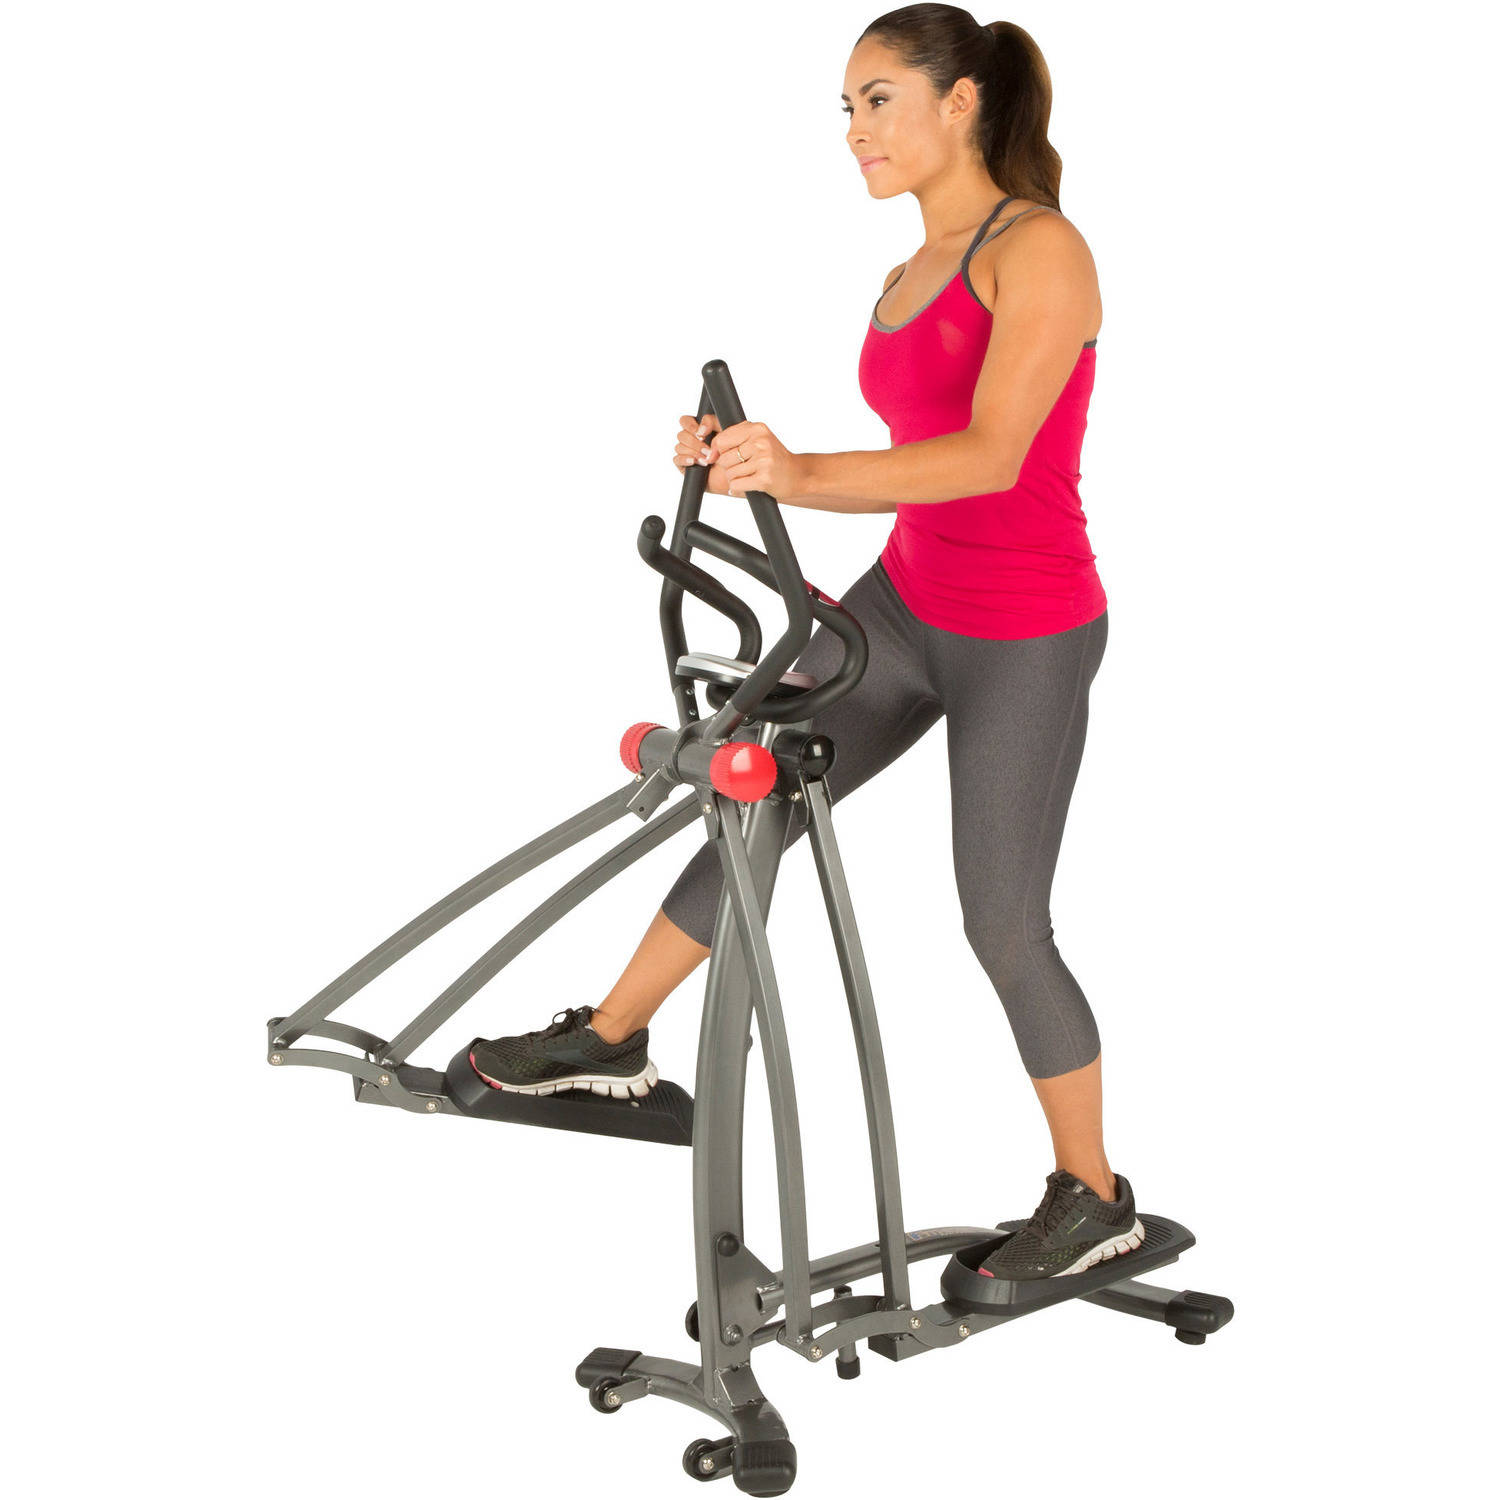 Fitness Reality Multi-Direction Elliptical Cloud Walker X1 with Pulse Sensors - image 24 of 31